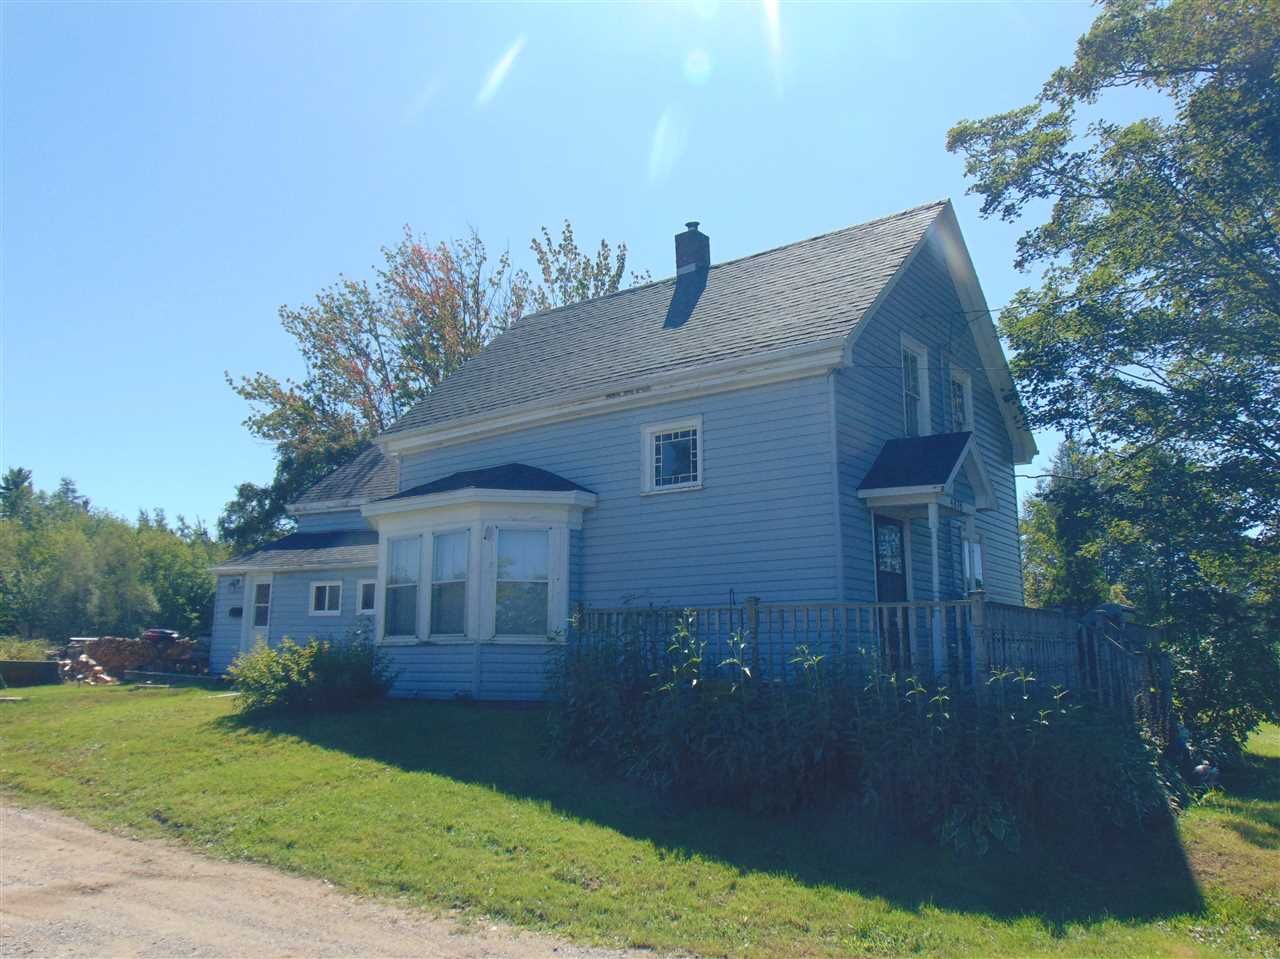 Main Photo: 4876 BROOKLYN Street in Somerset: 404-Kings County Residential for sale (Annapolis Valley)  : MLS®# 201921541